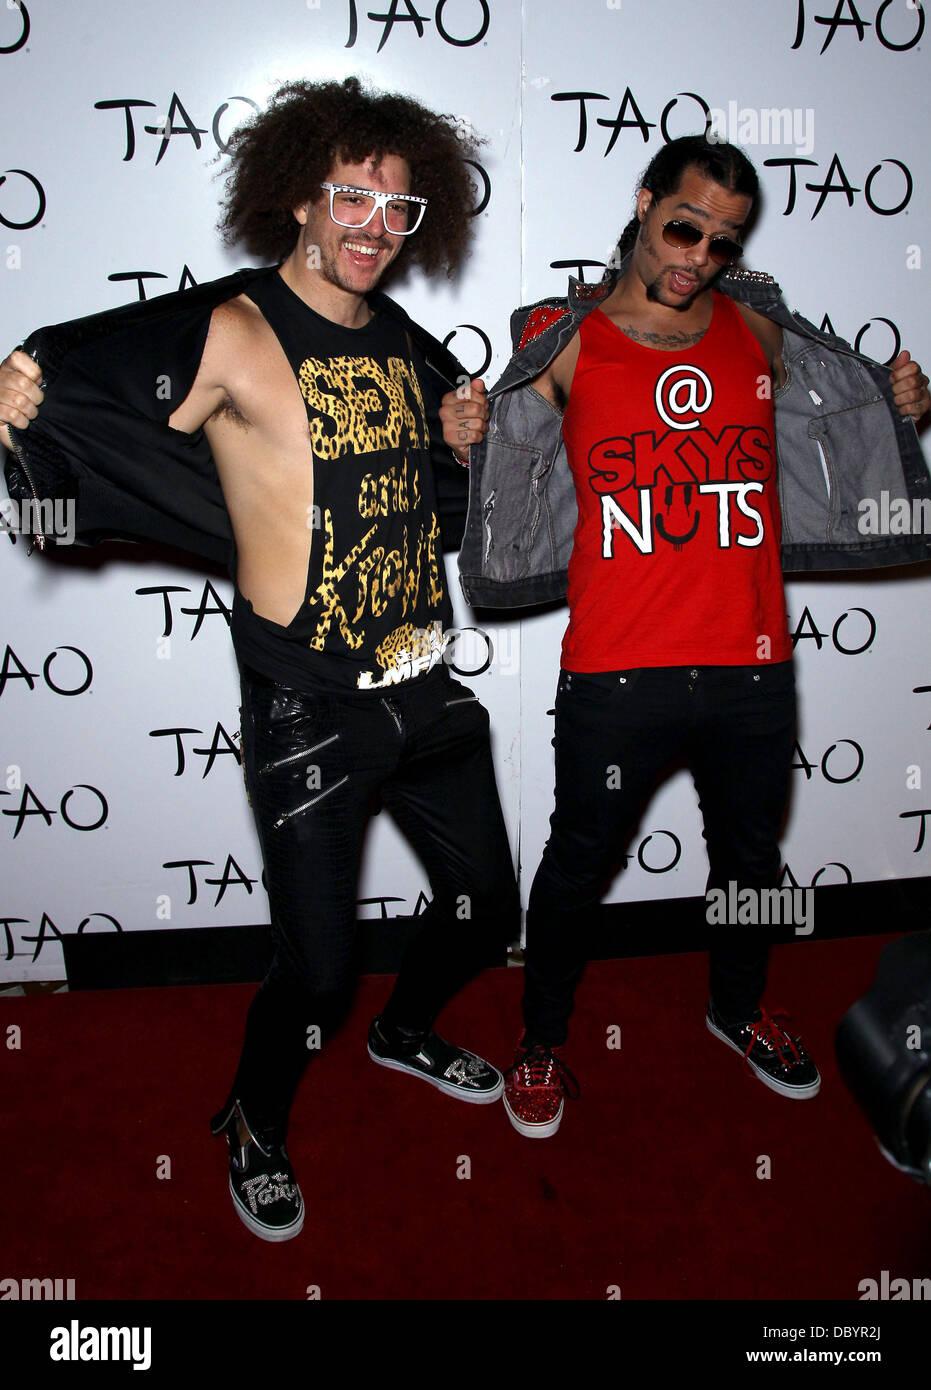 LMFAO host an after concert party at TAO nightclub inside The Venetian Resort and Casino Las Vegas, Nevada - 16.09.11 Stock Photo